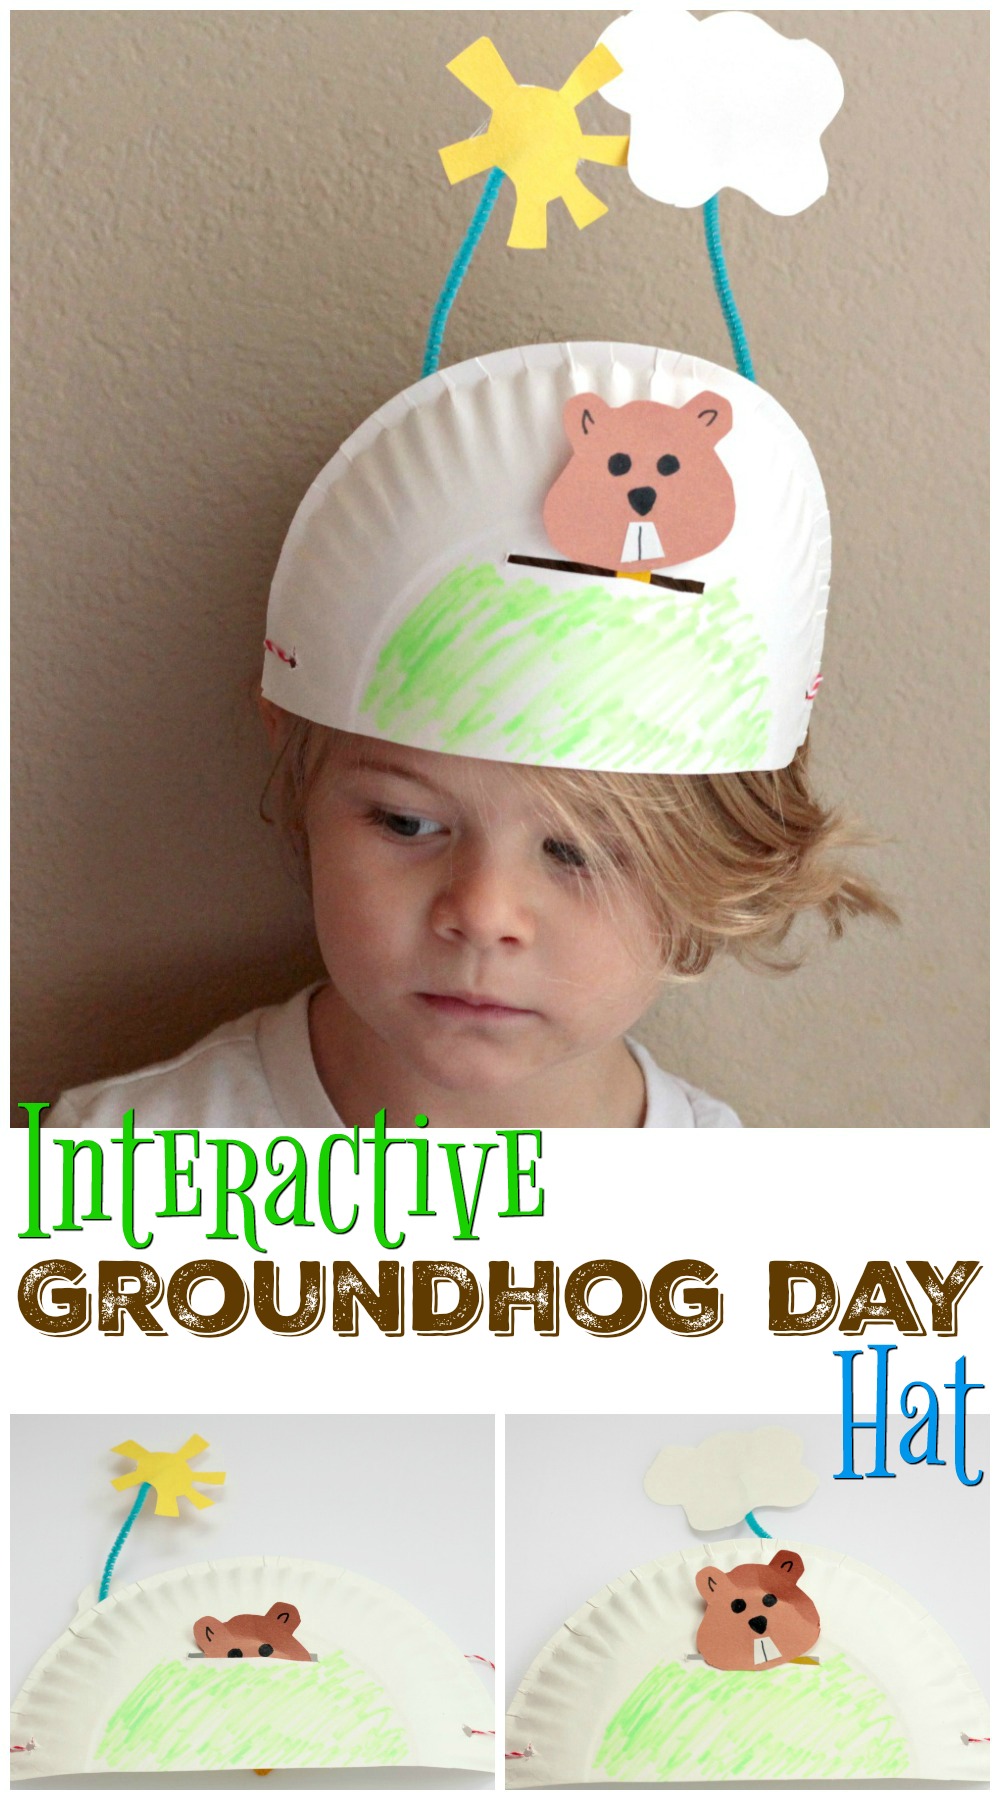 Fun and Interactive Groundhog Craft for preschool, Kindergarten or First Grade. Will the Groundhog see his shadow? 